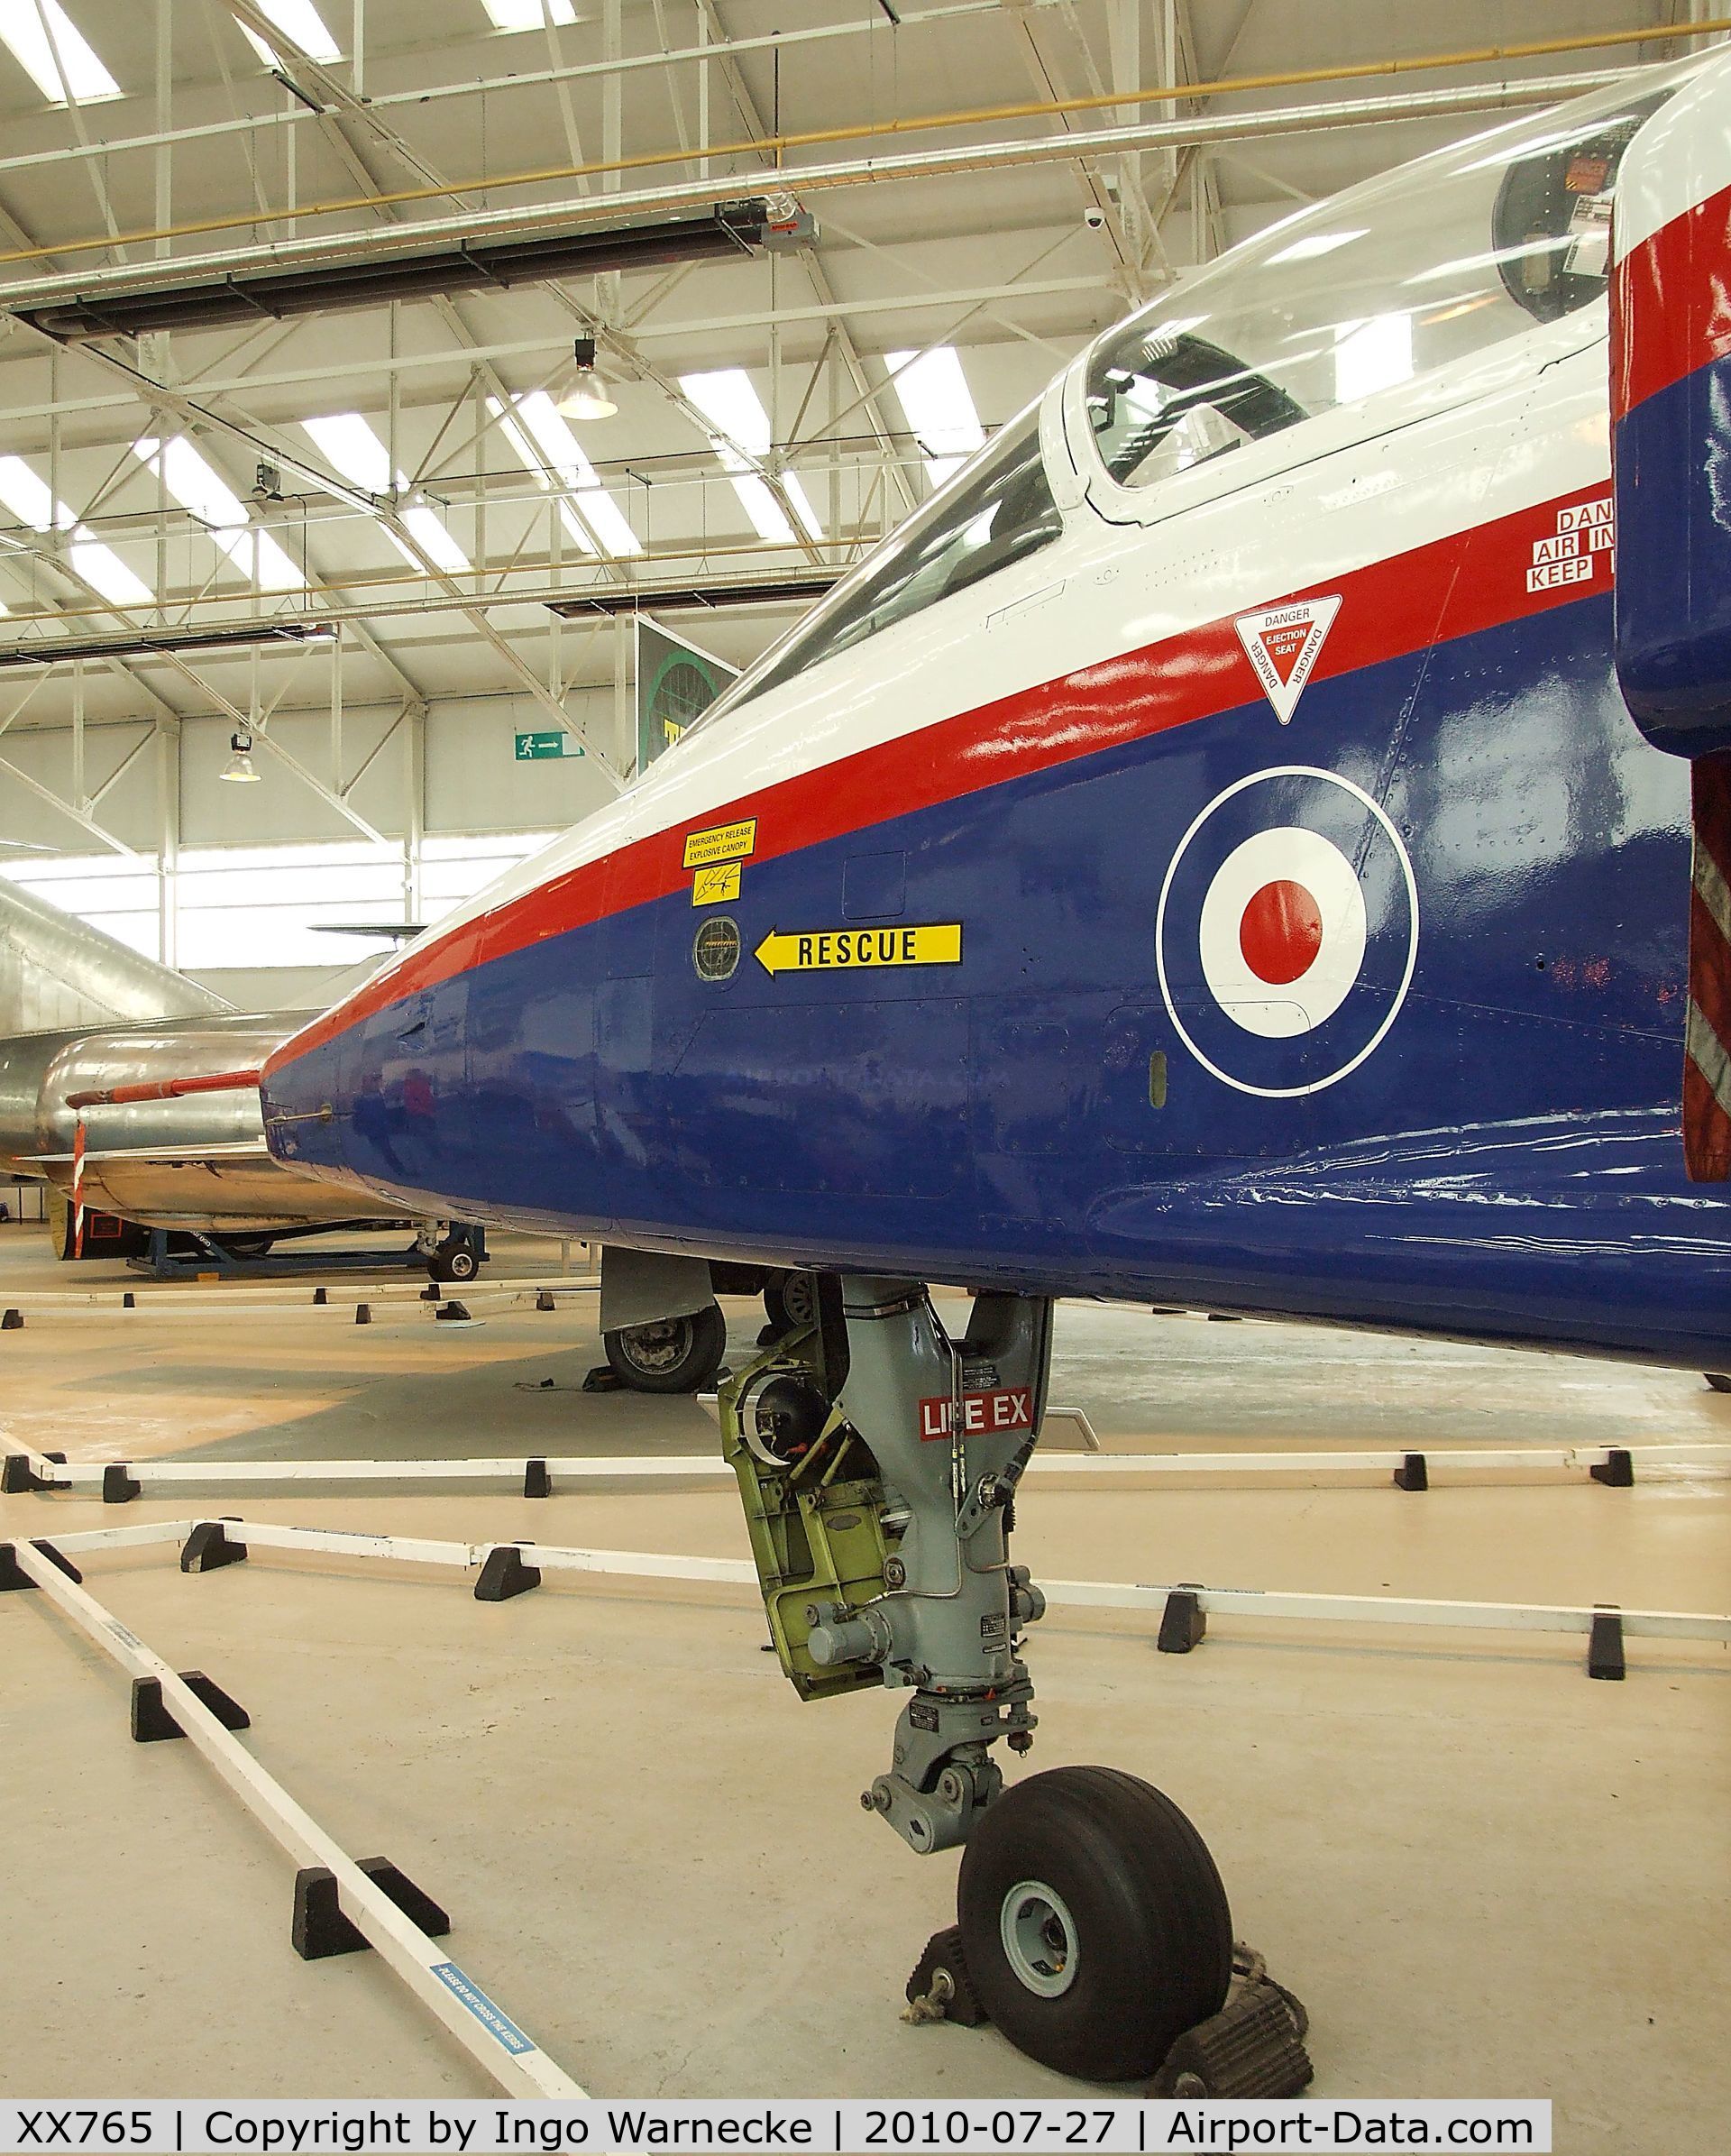 XX765, 1975 Sepecat Jaguar GR.3A C/N S.62, SEPECAT Jaguar ACT (Active Control Technology research aircraft for Fly-by-wire technology) at the RAF Museum, Cosford